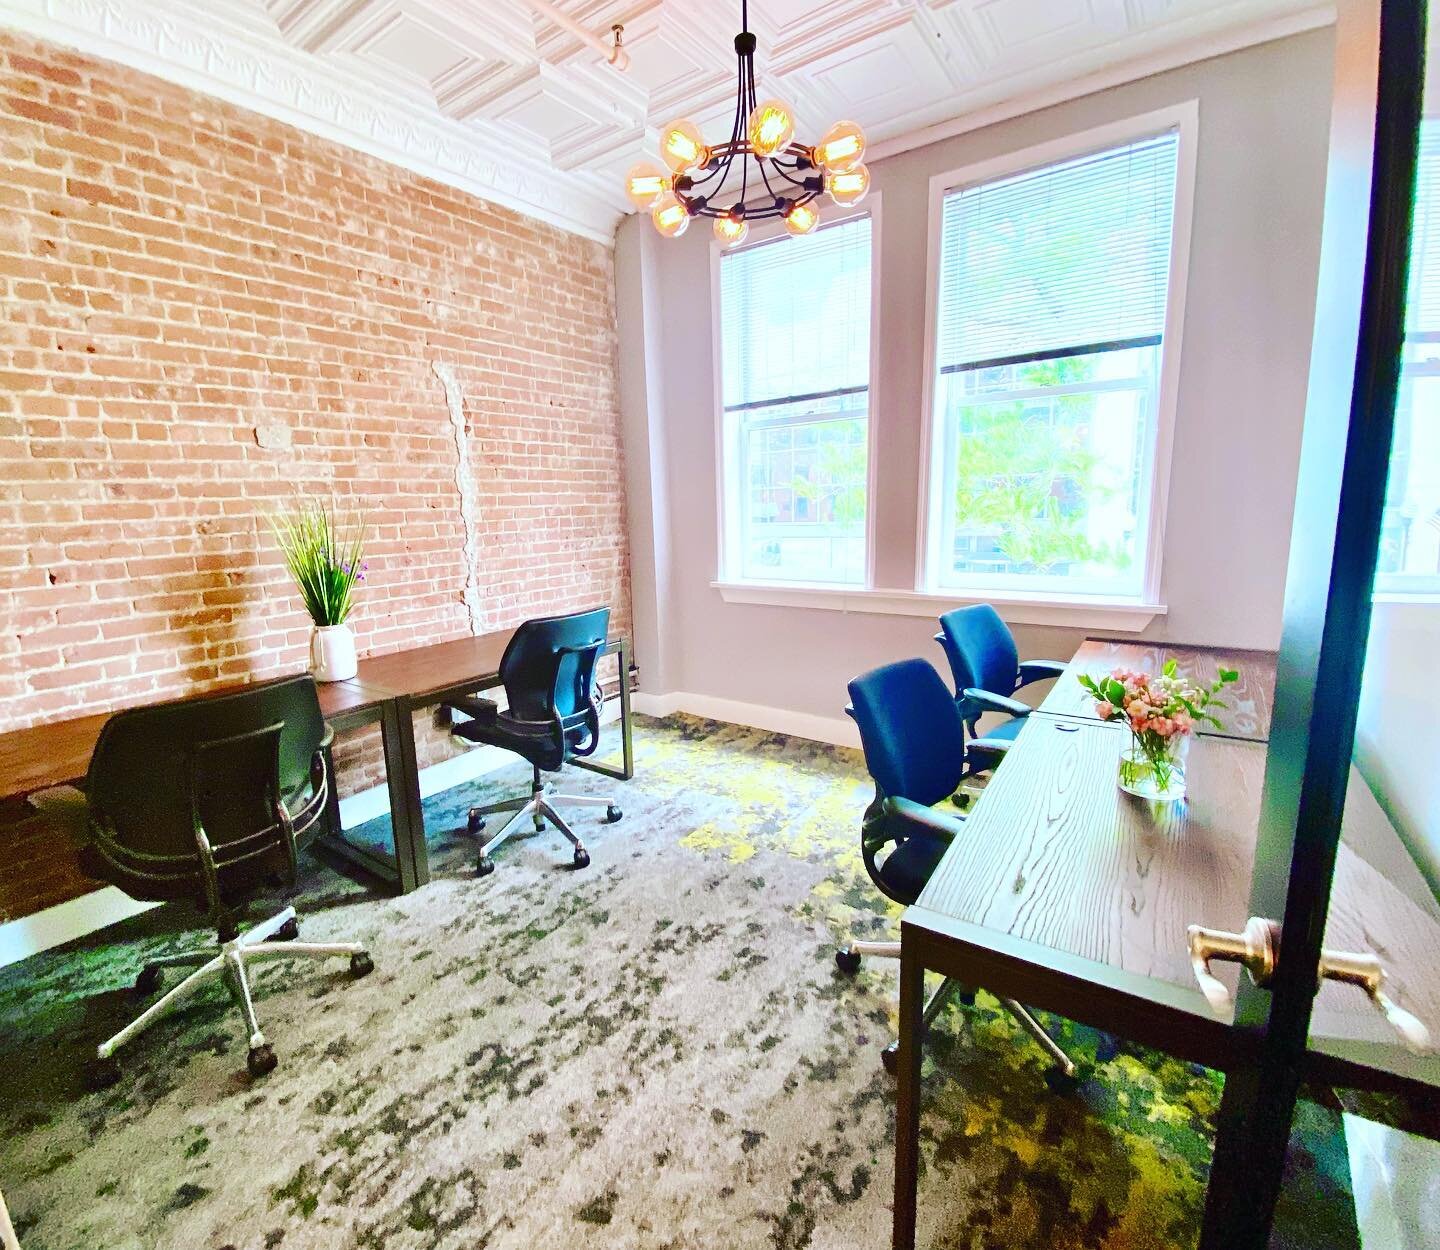 Beautiful 4 person private office with a ton of natural light and a view of downtown Morristown&hellip; available June 1st! Fully furnished with 24/7/365 access, high speed WiFi, and all utilities included 💪✅ Message us to schedule a tour! #Coworkin